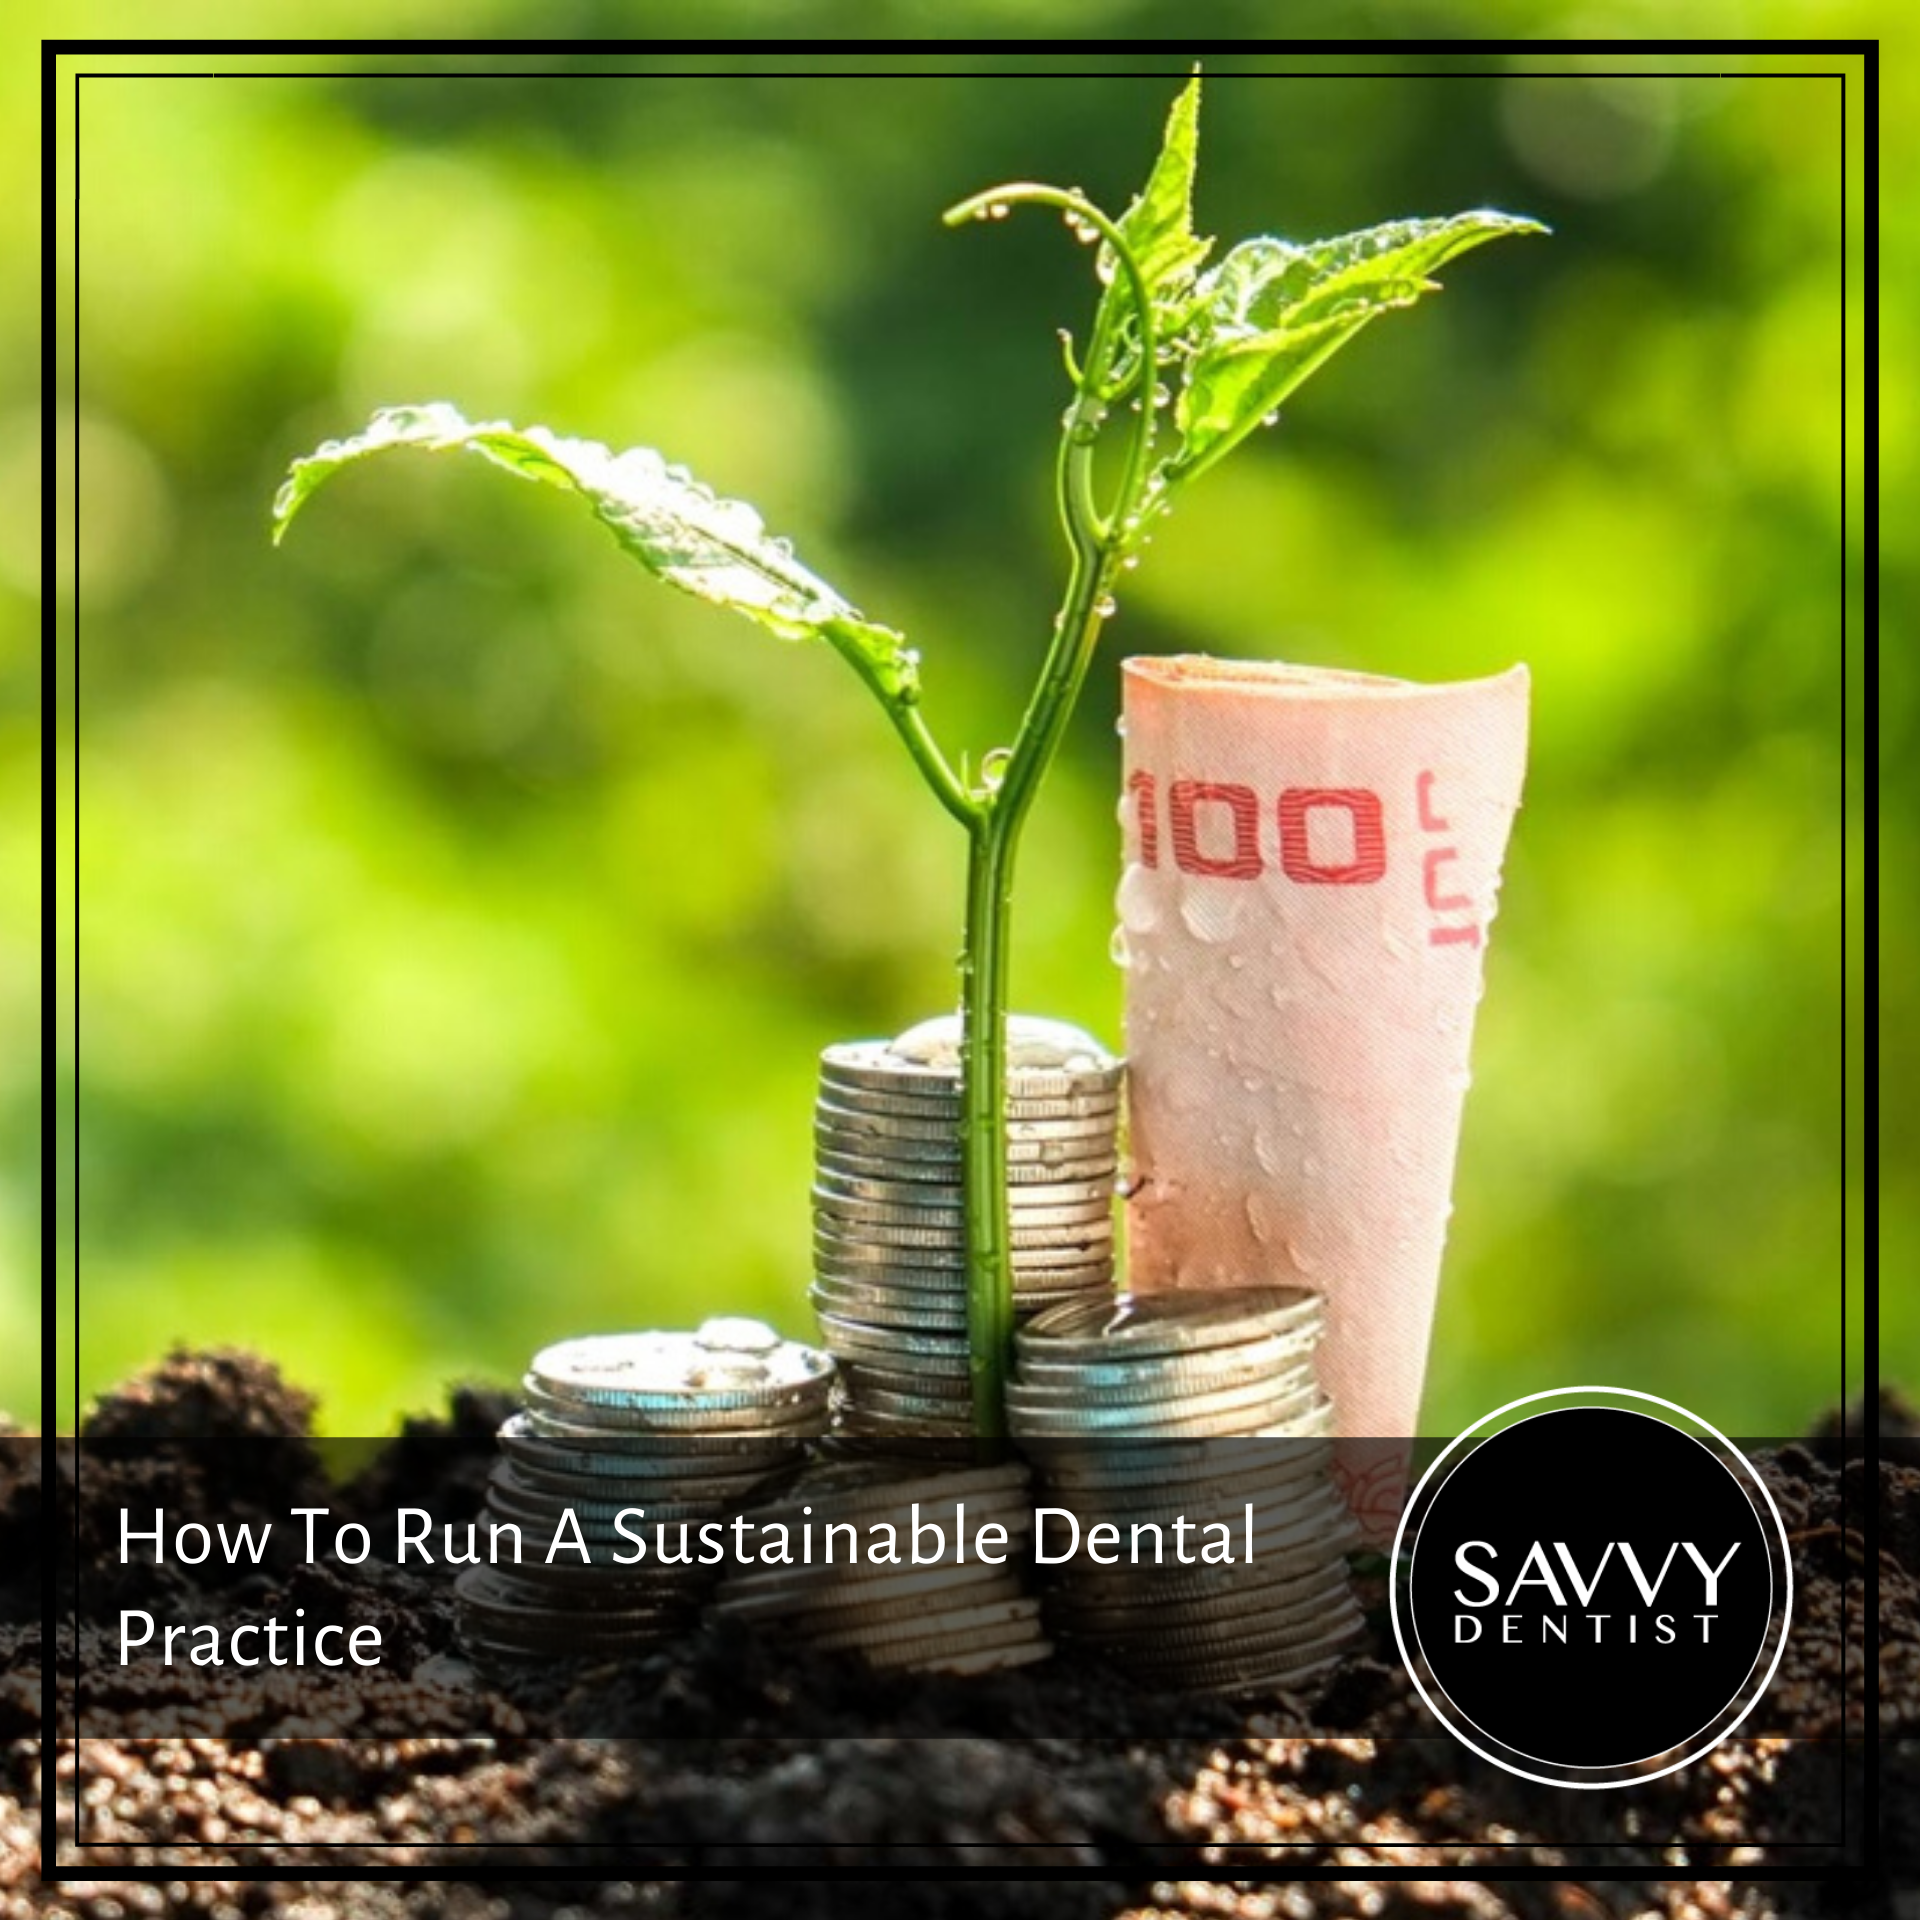 How To Run A Sustainable Dental Practice